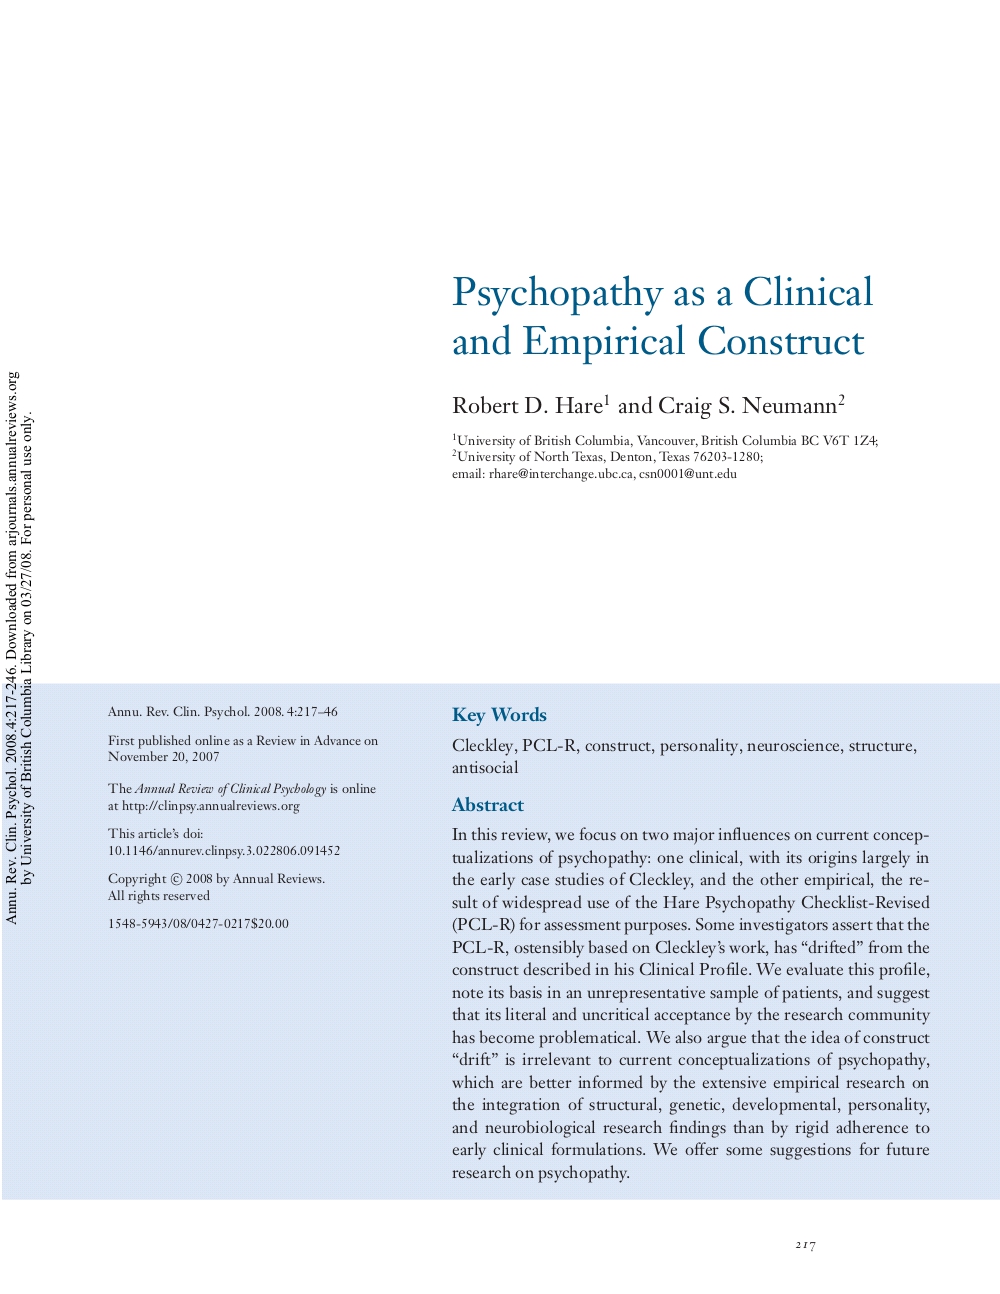 Psychopathy as a Clinical and Empirical Construct